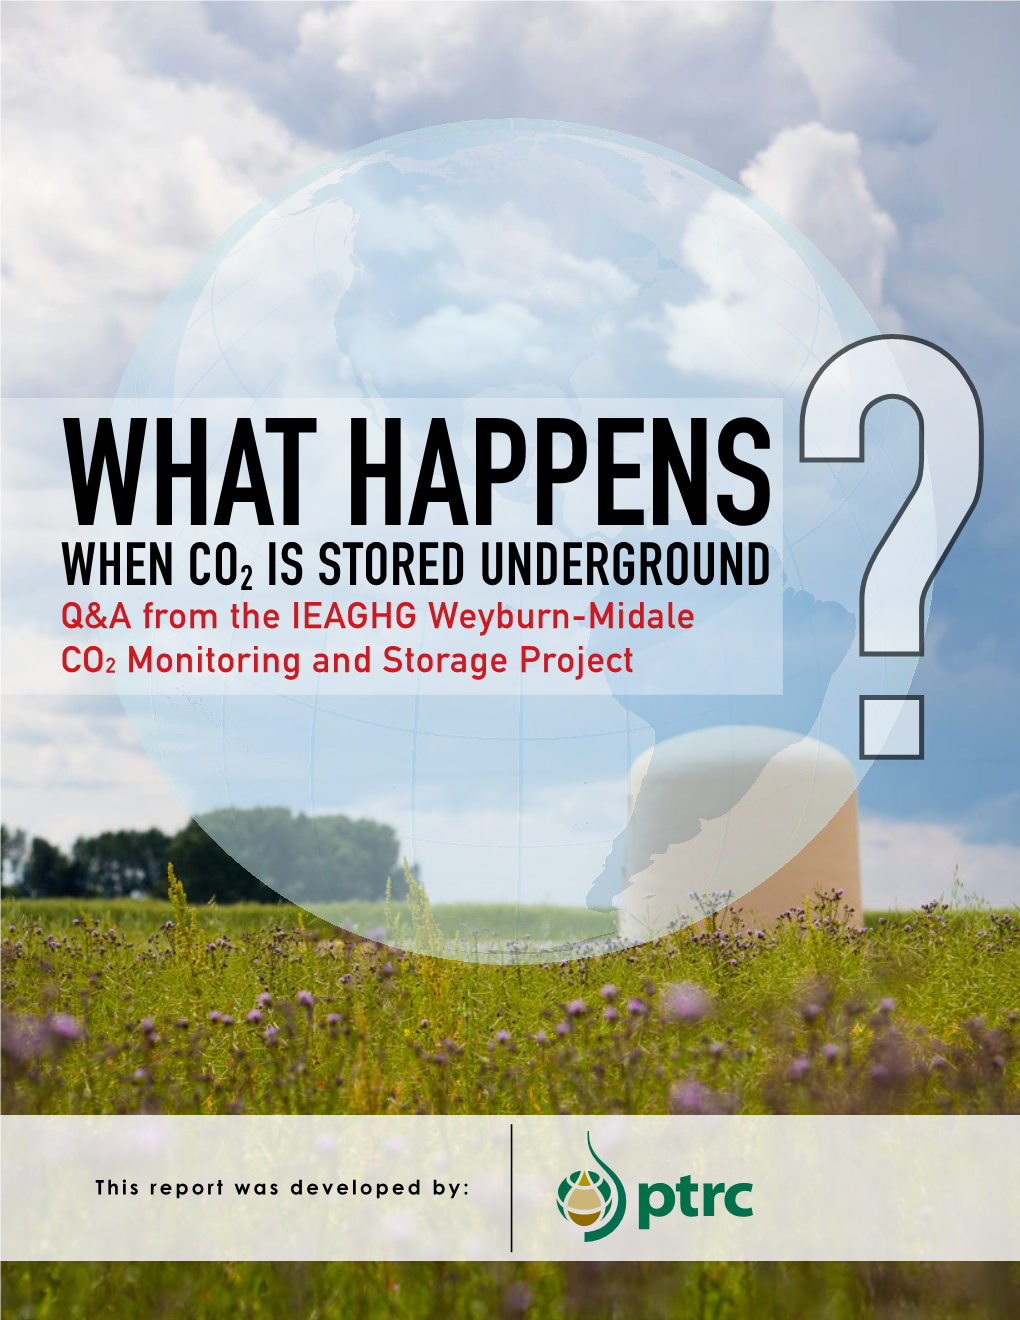 What Happens When CO2 Is Stored Underground? Q&A from the IEAGHG Weyburn-Midale CO2 Monitoring and Storage Project